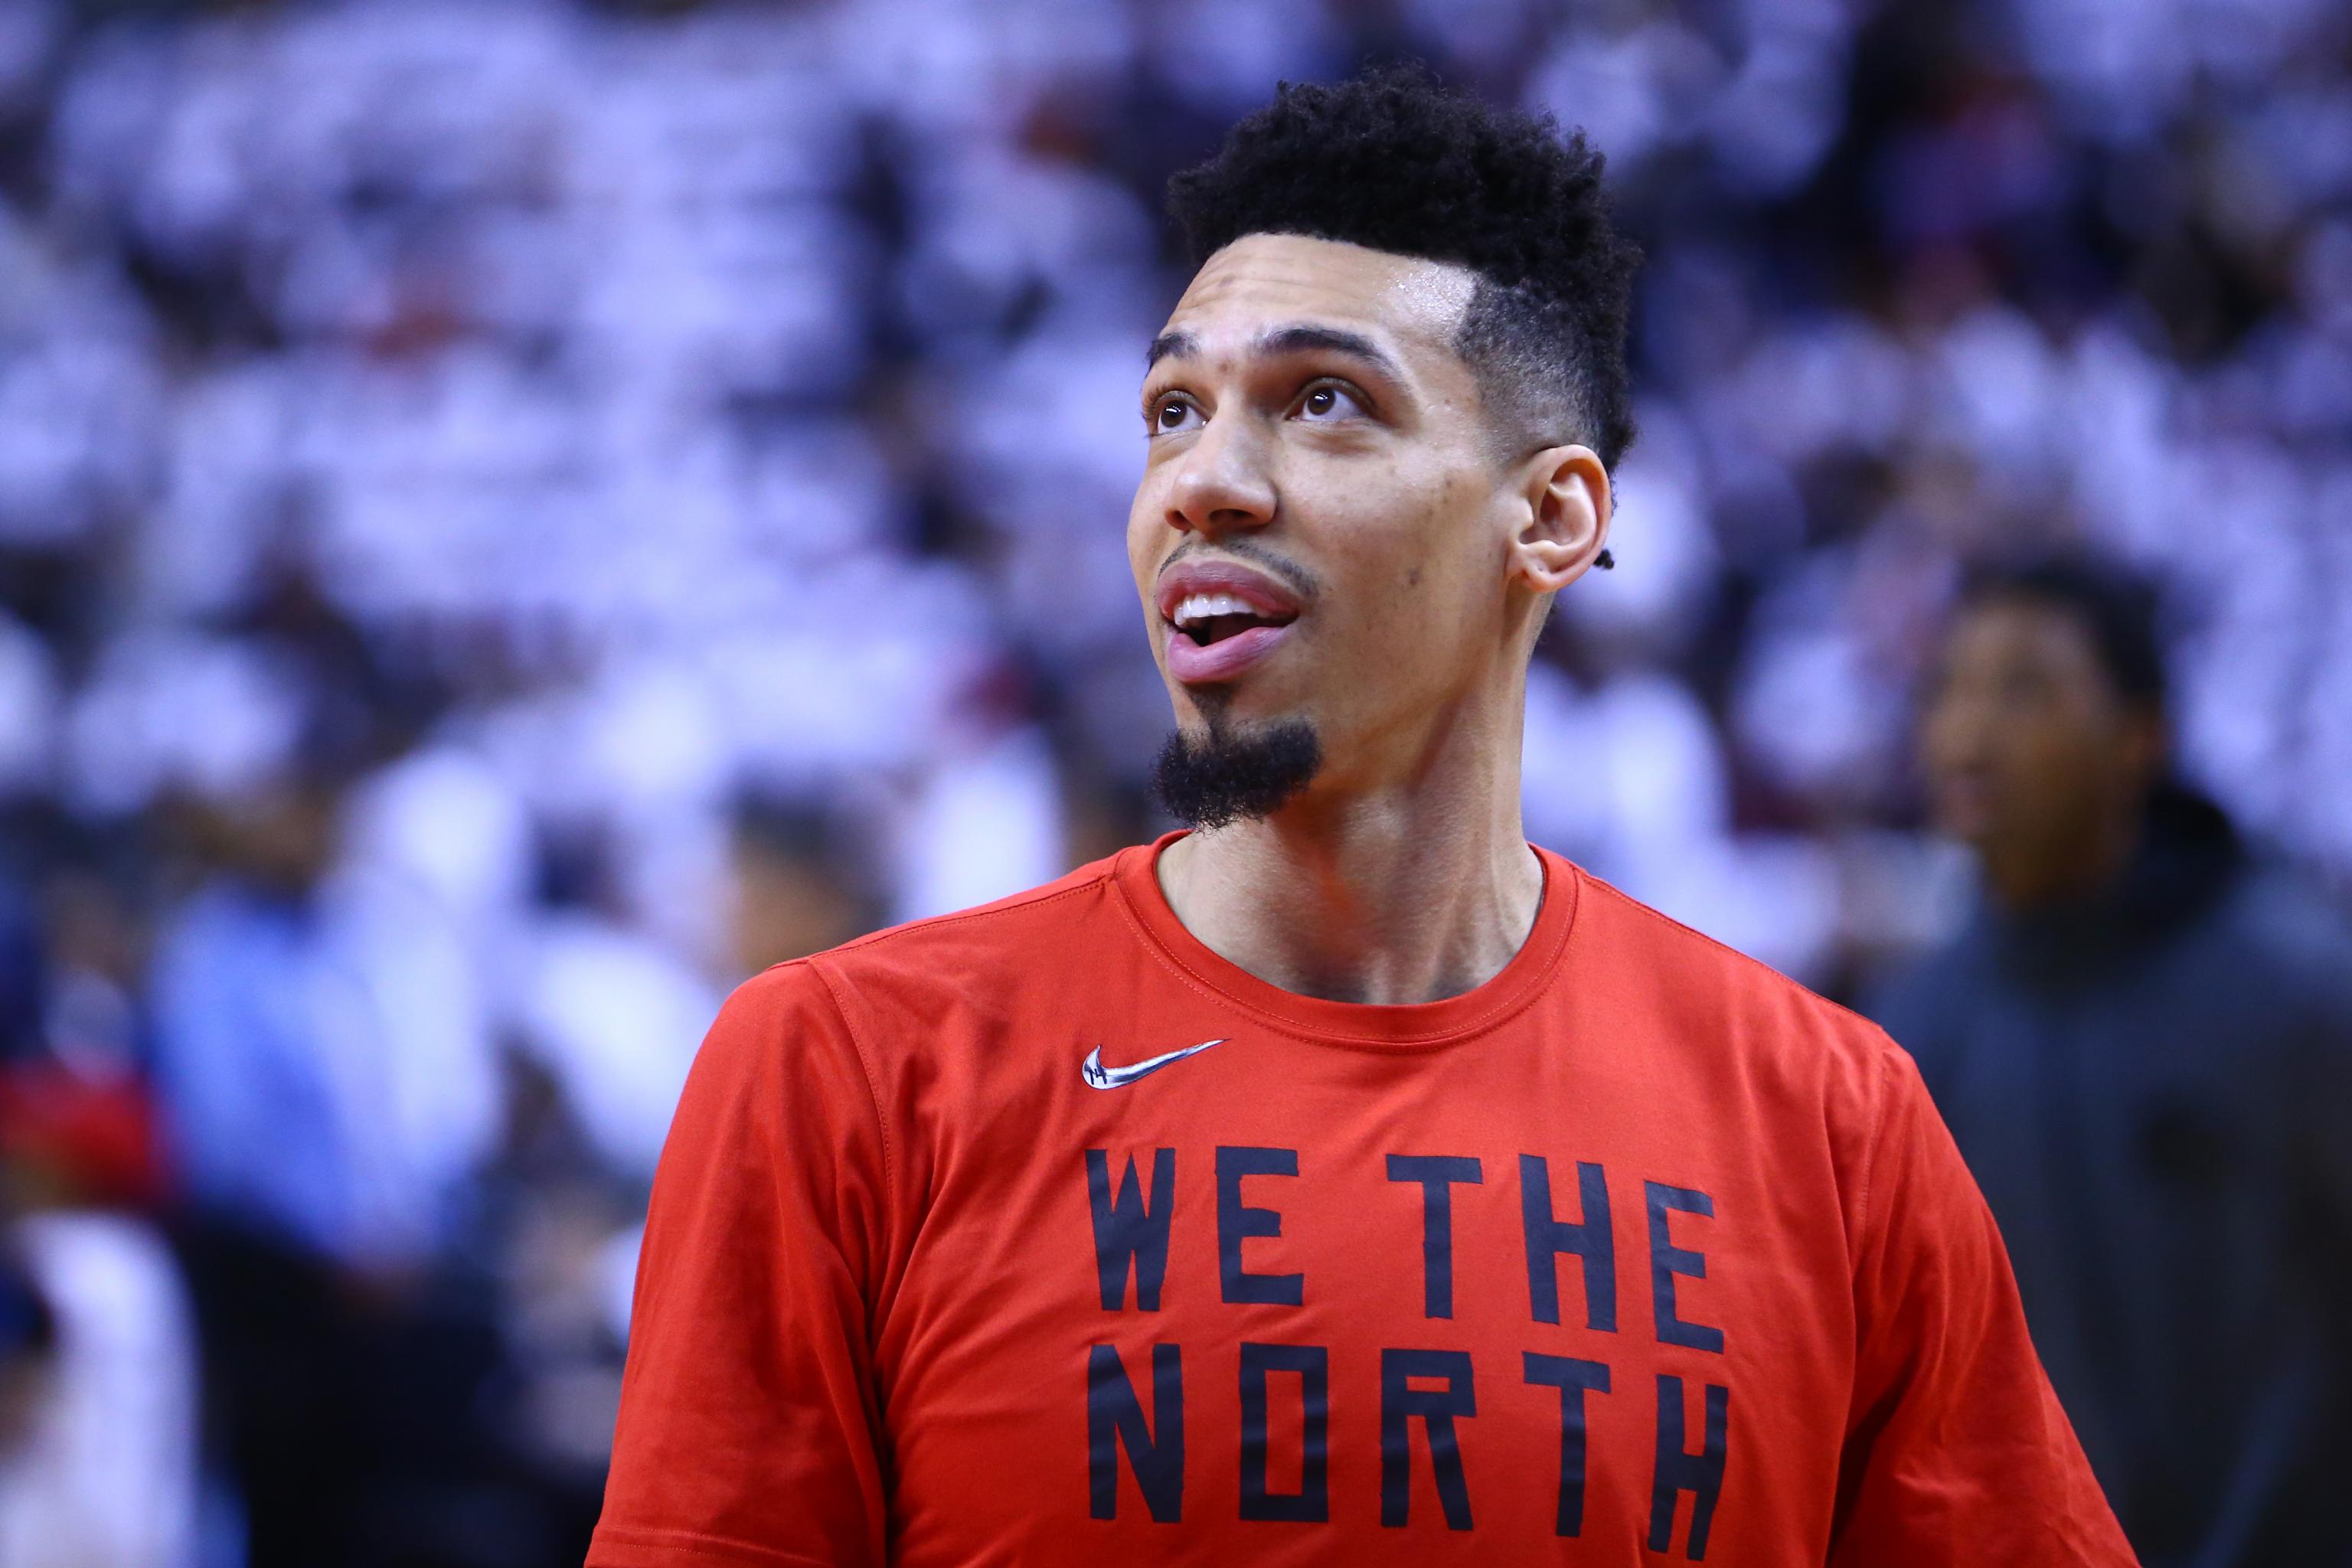 Lakers Rumors: Danny Green leaks details about unreleased alternate jersey  - Silver Screen and Roll